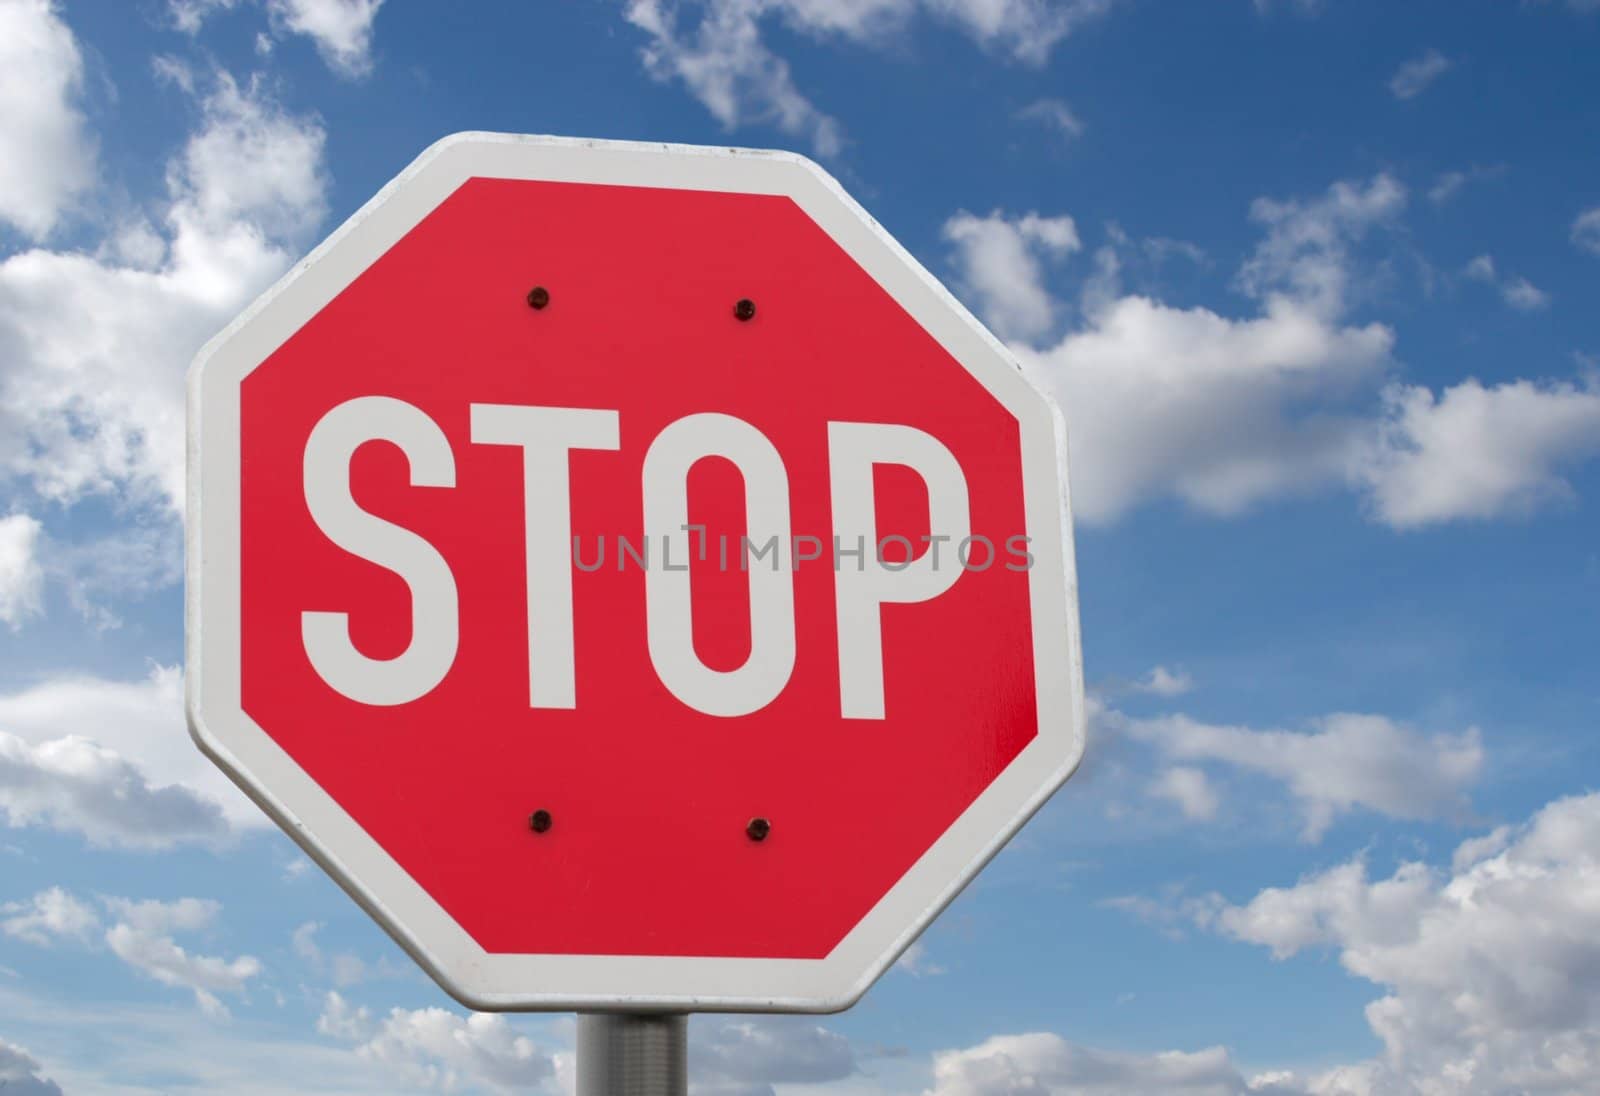 Stop sign against blue sky and clouds